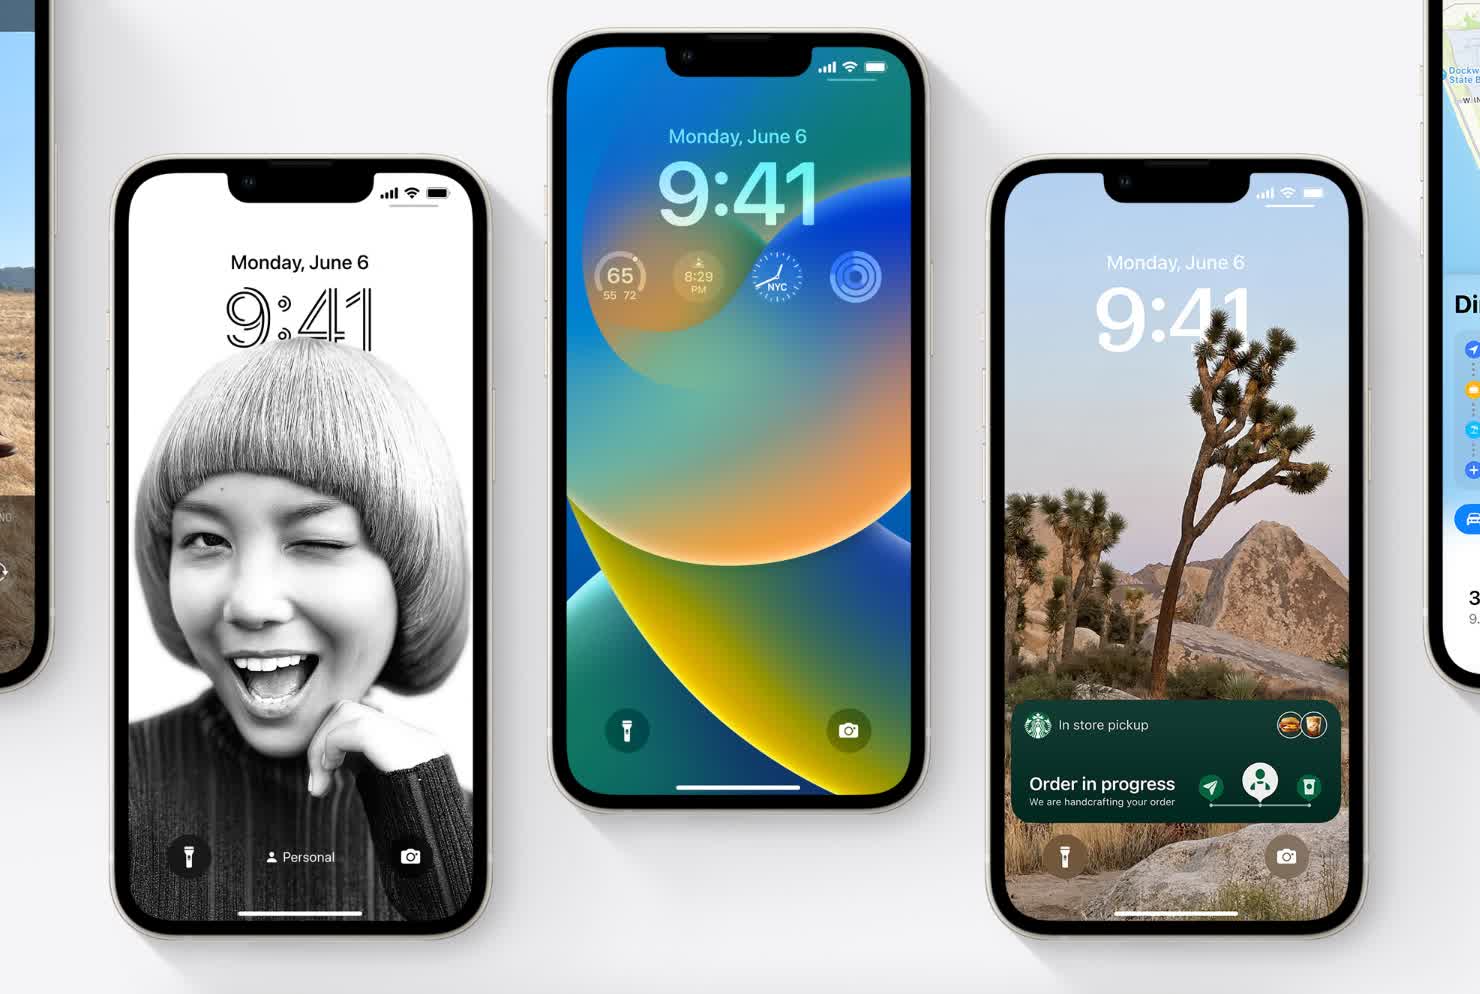 iOS 16 wallpaper modes hint at iPhone 14's always-on screen | TechSpot  Forums